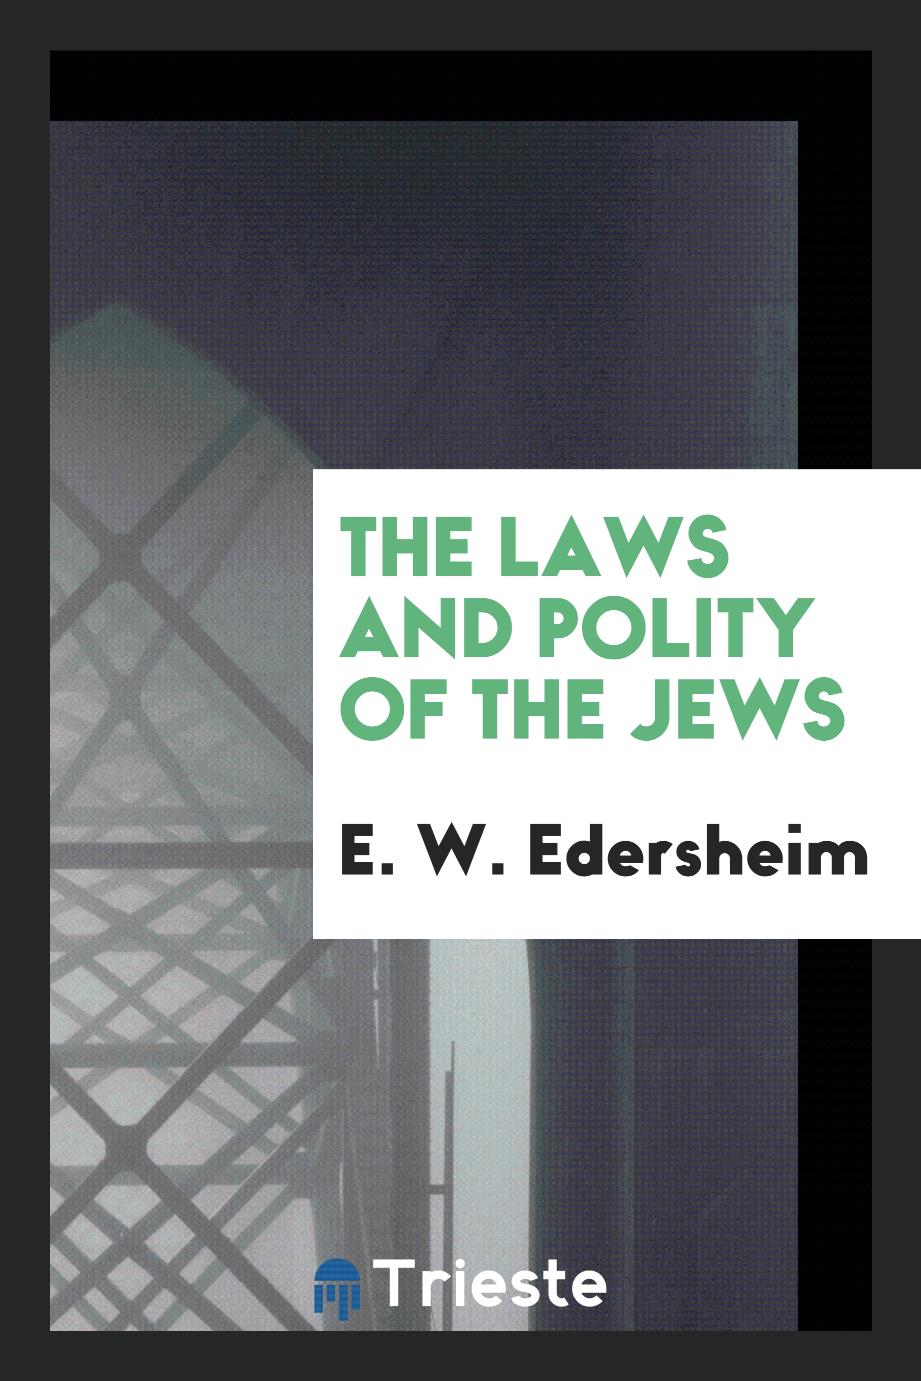 The laws and polity of the Jews